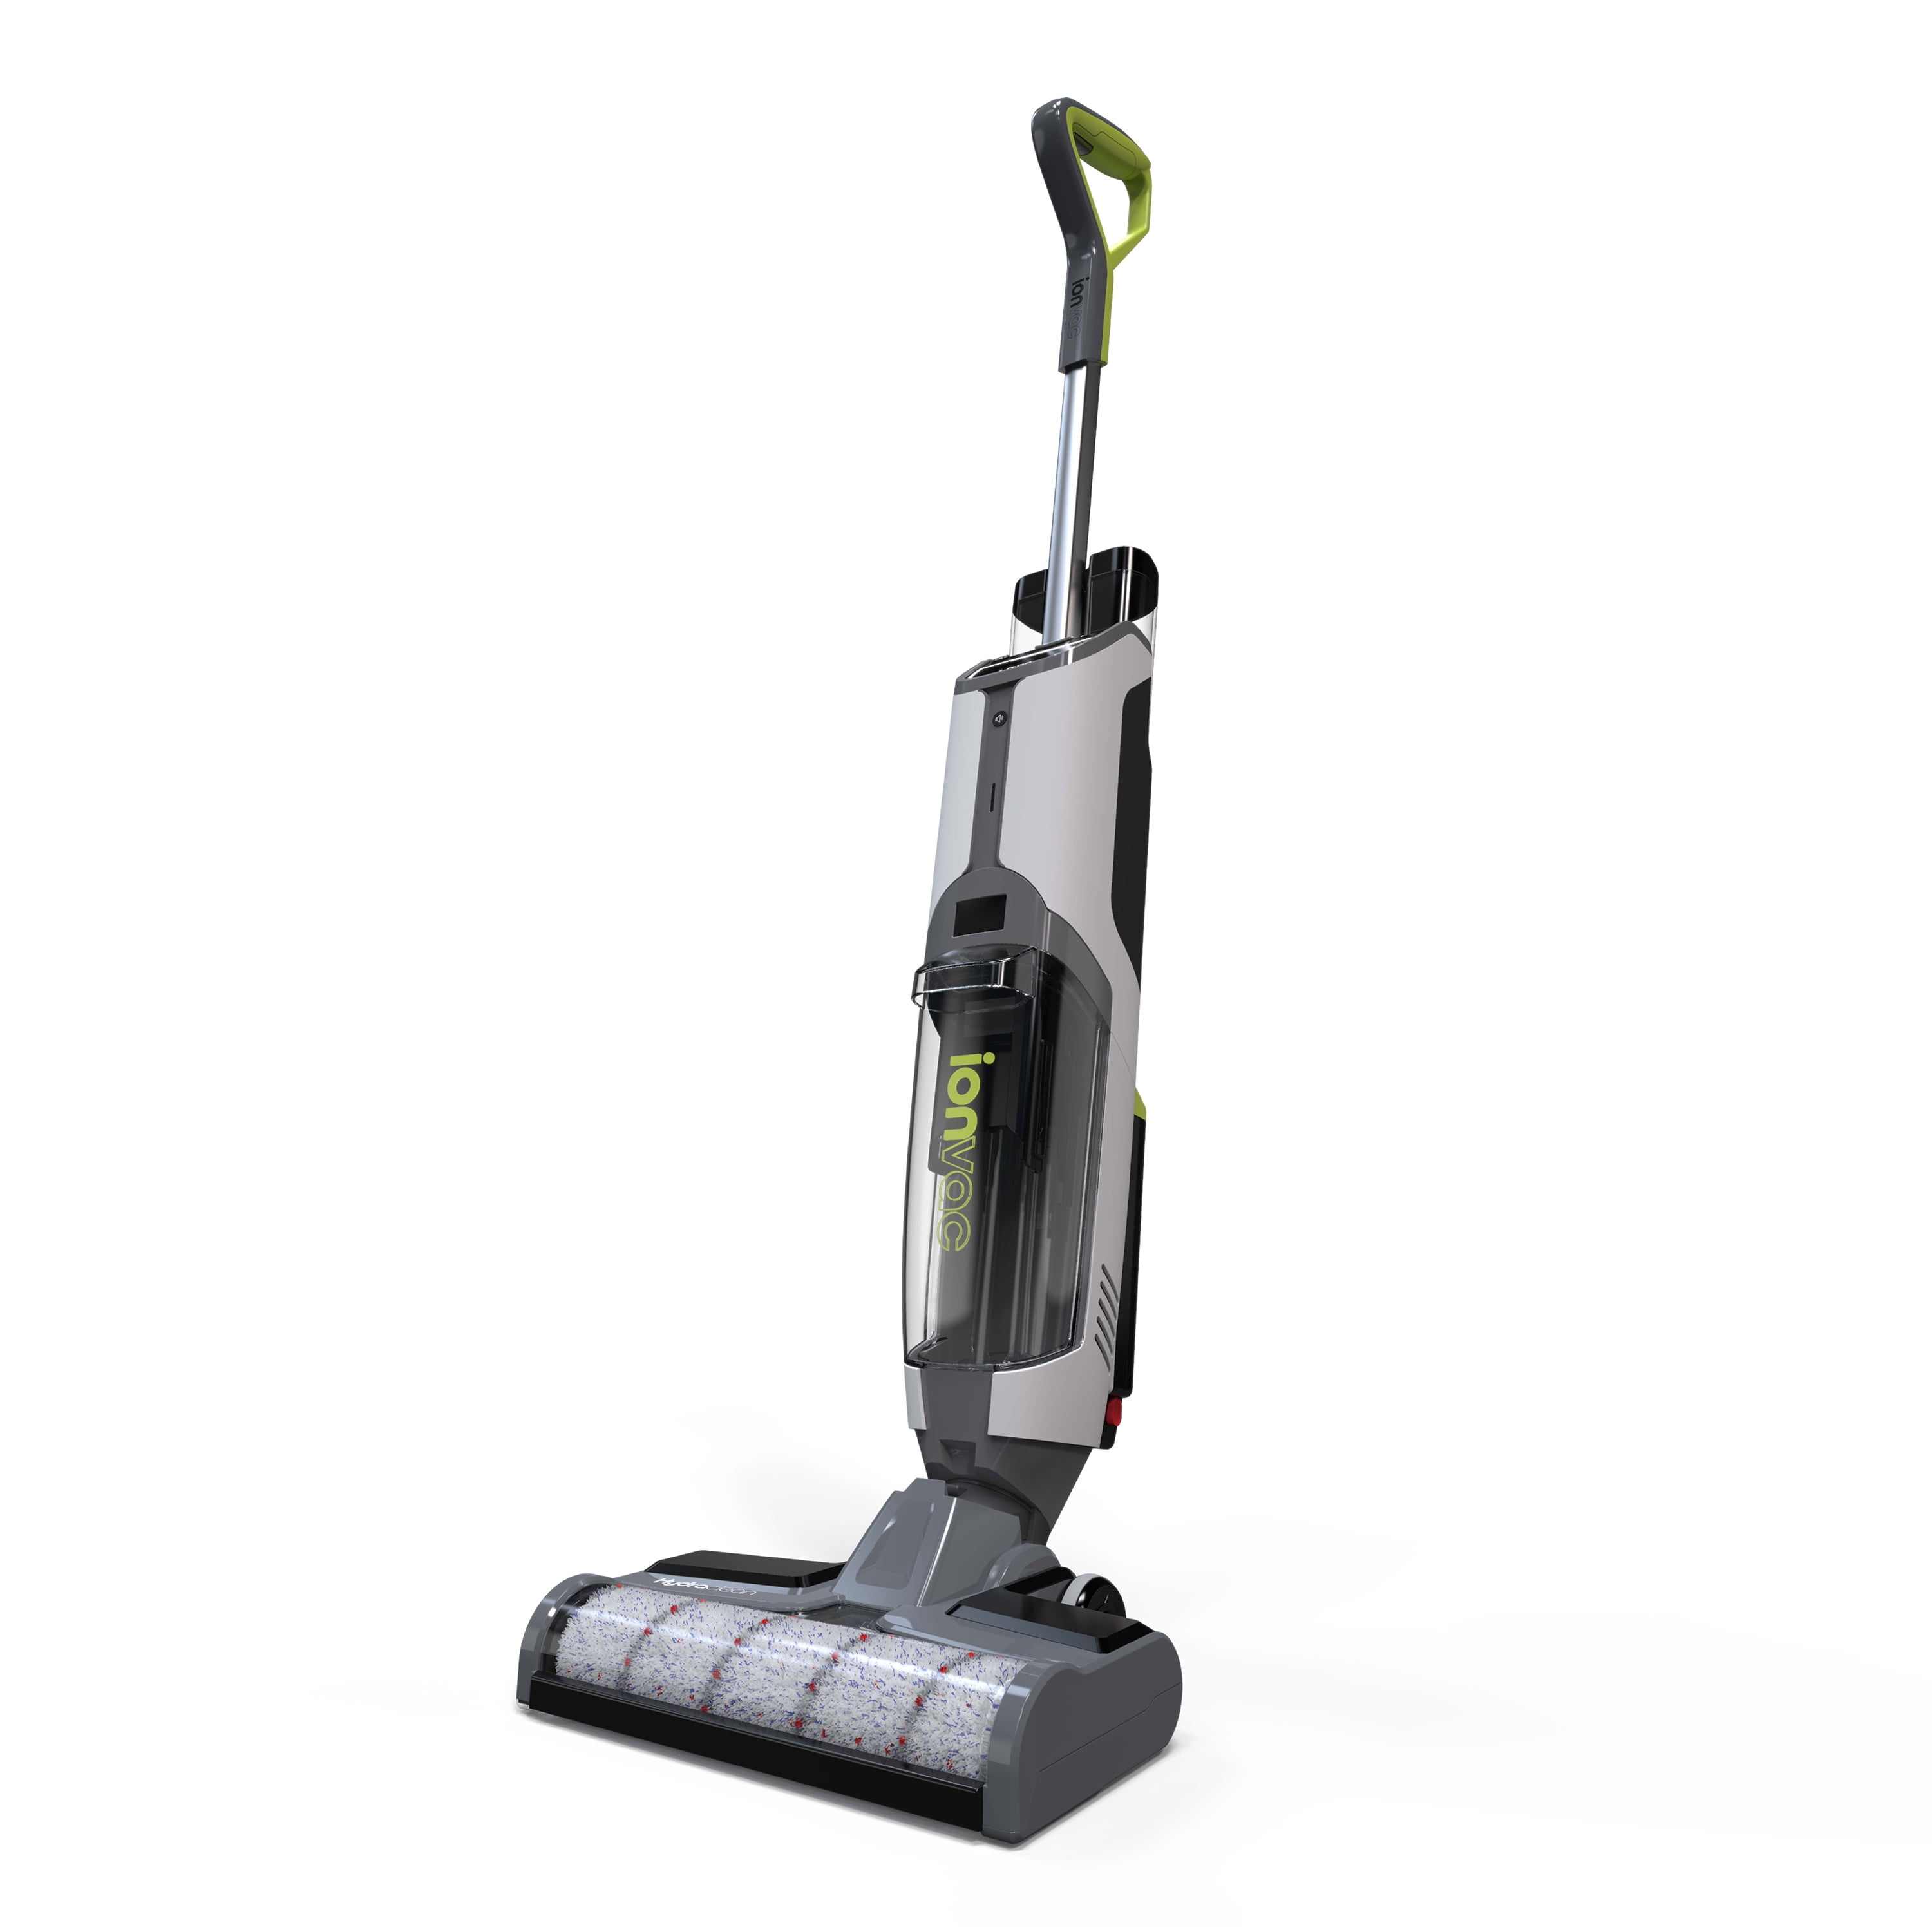 Ionvac Hydraclean Cordless All In One, Wet Vac For Tile Floors